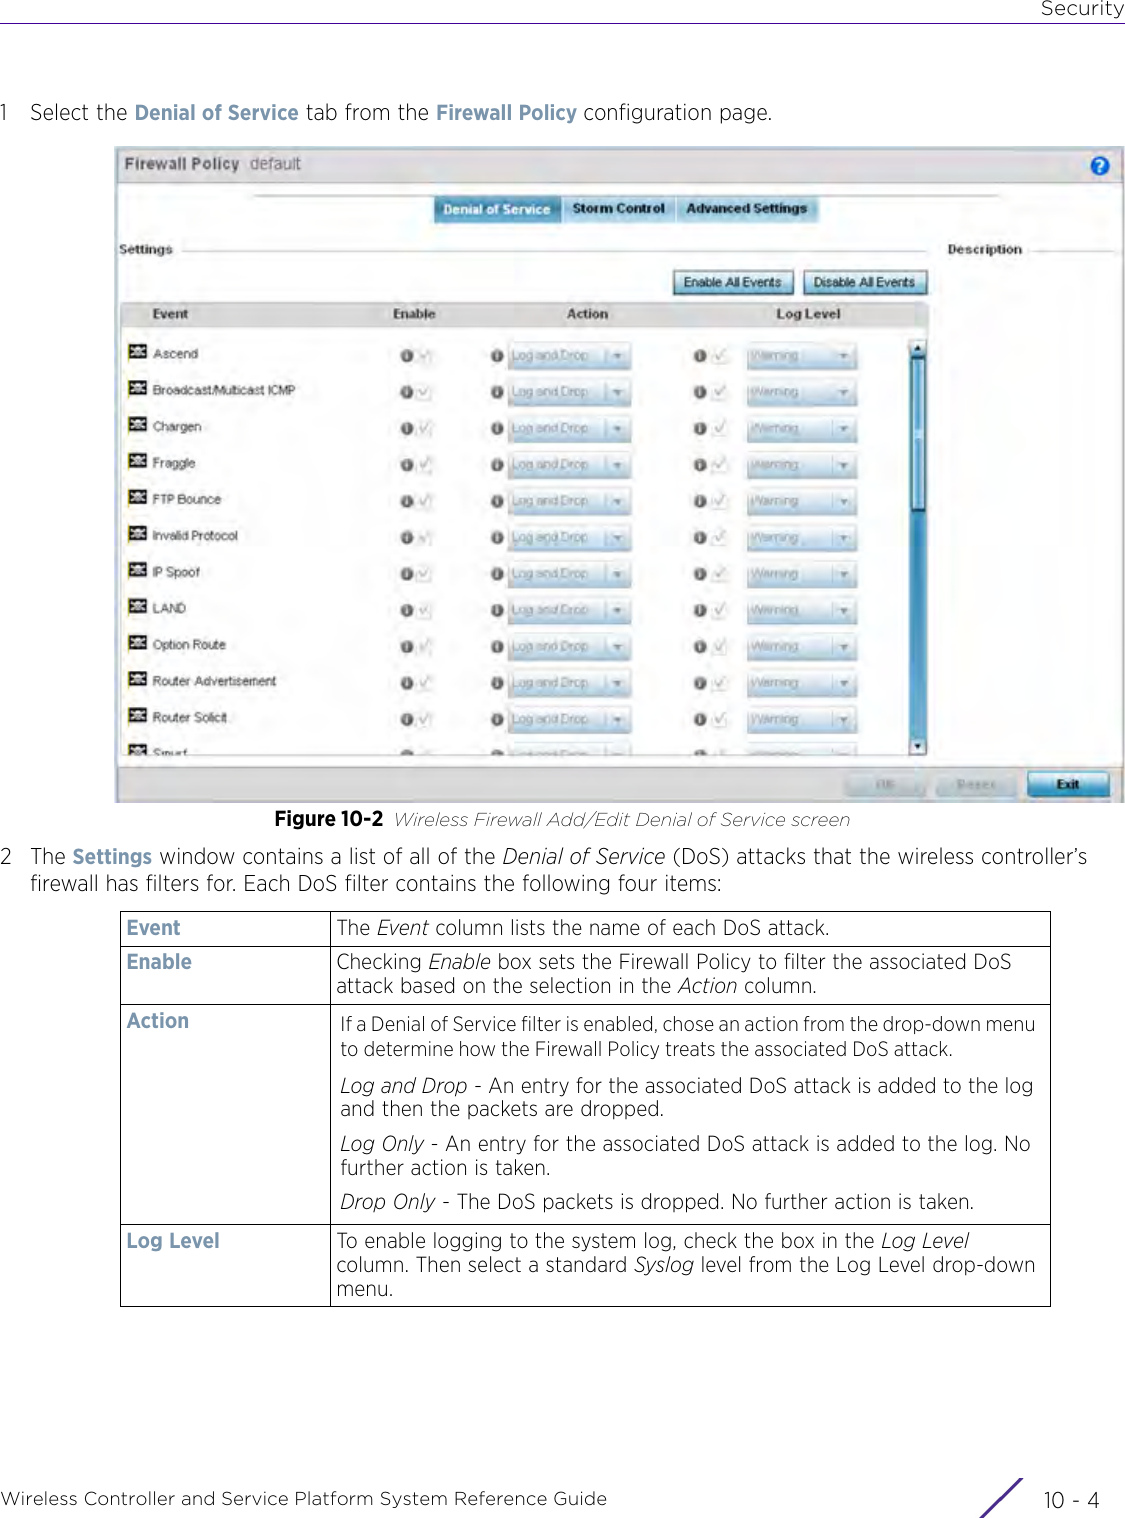 SecurityWireless Controller and Service Platform System Reference Guide  10 - 41 Select the Denial of Service tab from the Firewall Policy configuration page.Figure 10-2 Wireless Firewall Add/Edit Denial of Service screen2The Settings window contains a list of all of the Denial of Service (DoS) attacks that the wireless controller’s firewall has filters for. Each DoS filter contains the following four items:Event The Event column lists the name of each DoS attack. Enable Checking Enable box sets the Firewall Policy to filter the associated DoS attack based on the selection in the Action column.Action If a Denial of Service filter is enabled, chose an action from the drop-down menu to determine how the Firewall Policy treats the associated DoS attack.Log and Drop - An entry for the associated DoS attack is added to the log and then the packets are dropped.Log Only - An entry for the associated DoS attack is added to the log. No further action is taken.Drop Only - The DoS packets is dropped. No further action is taken.Log Level To enable logging to the system log, check the box in the Log Level column. Then select a standard Syslog level from the Log Level drop-down menu.